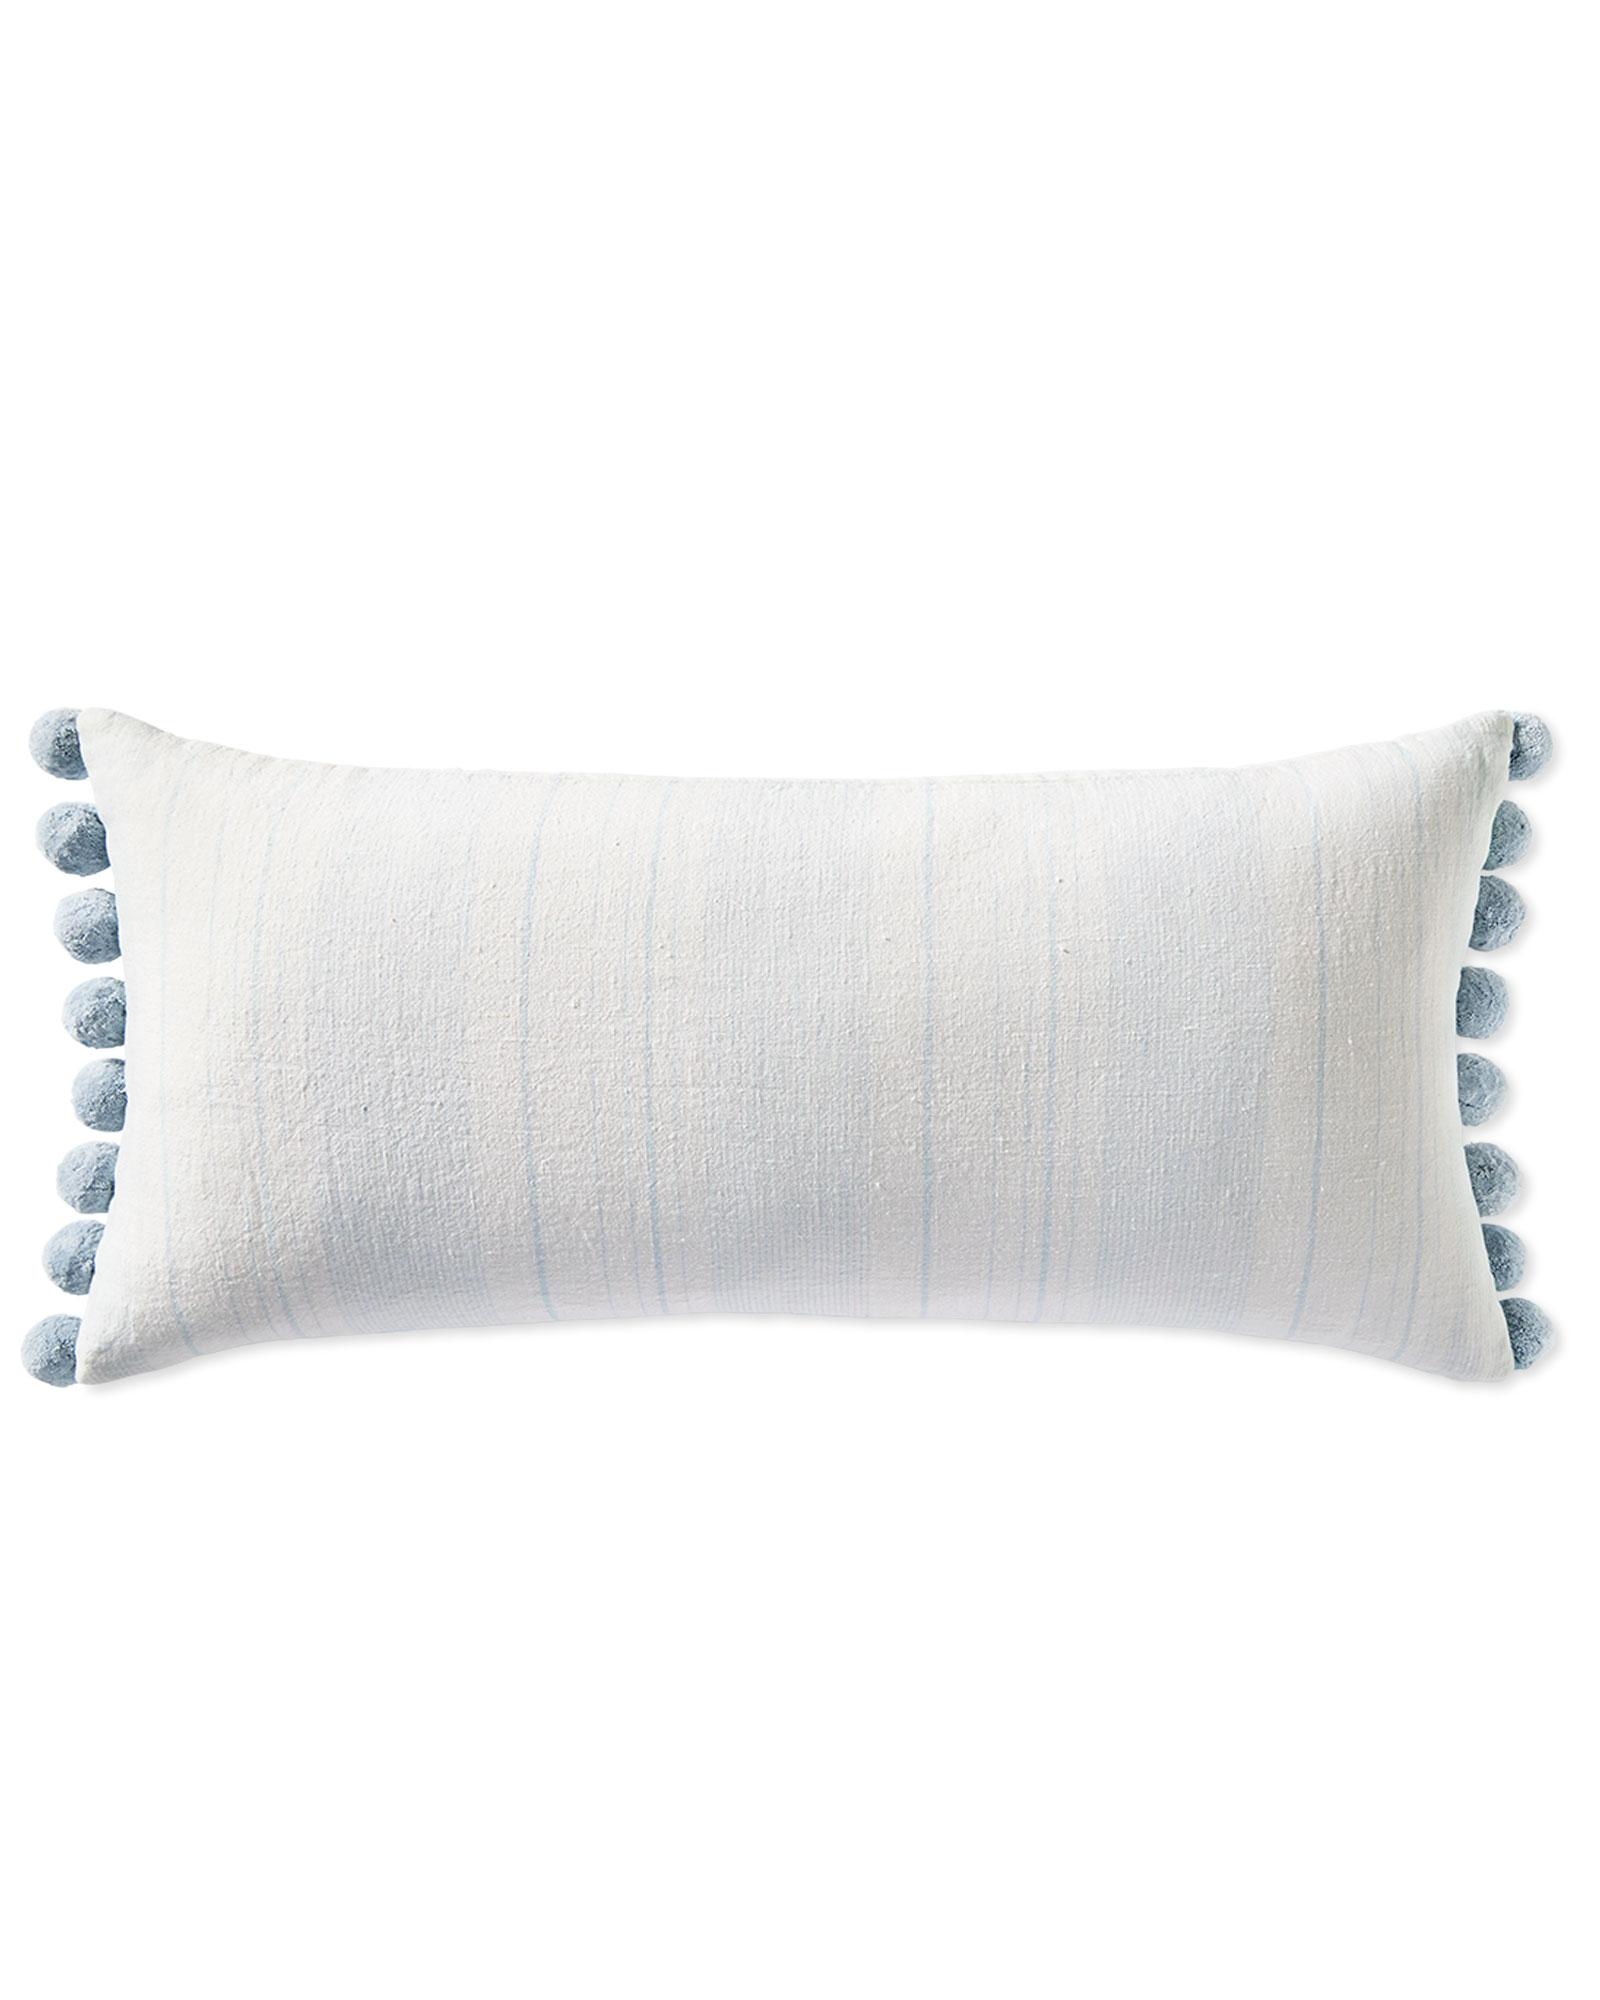 Indoor Pillow Inserts, 22 Sq | Serena & Lily